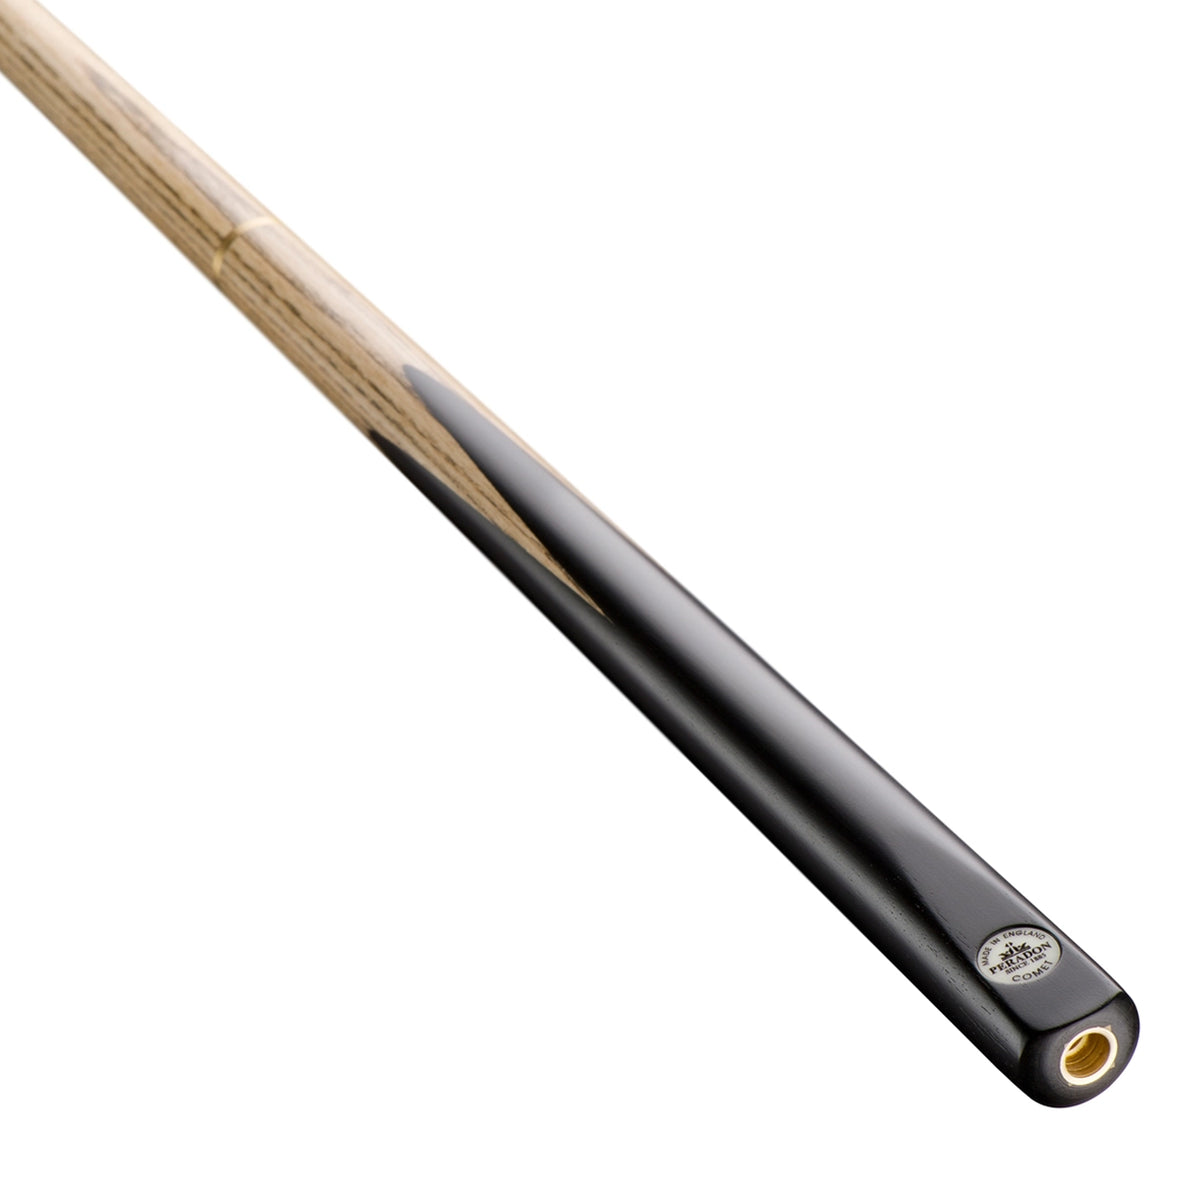 Peradon Comet 3/4 Jointed 8 Ball Pool Cue. On angle view